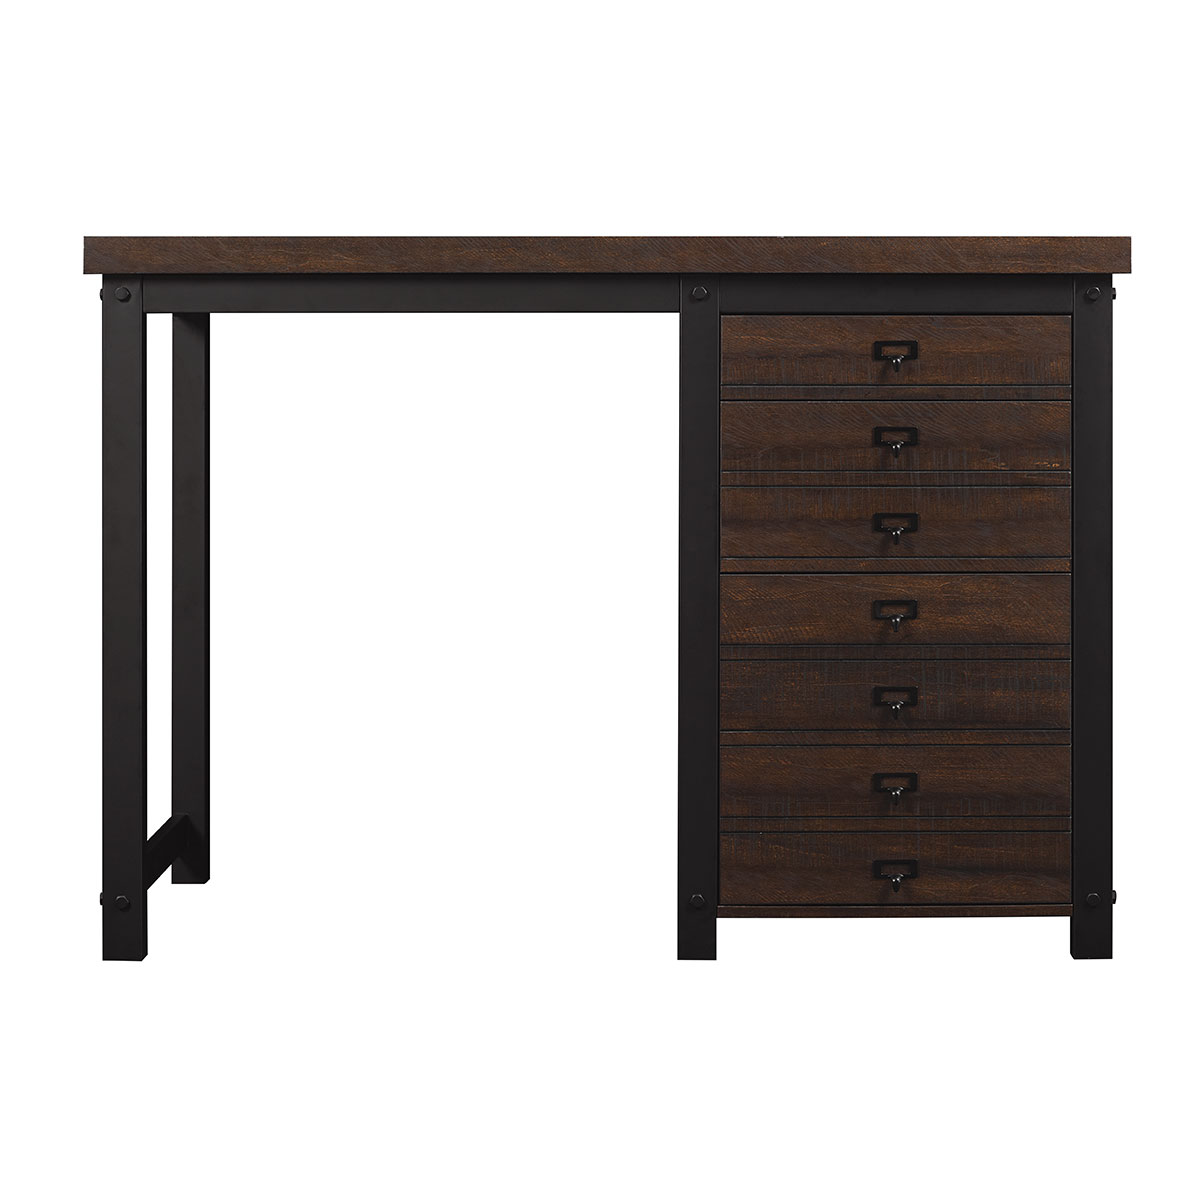 Twin Star Electric Fireplace Troubleshooting Fresh Uptown Loft Desk Od6490 52 Pd01 Twin Star Home